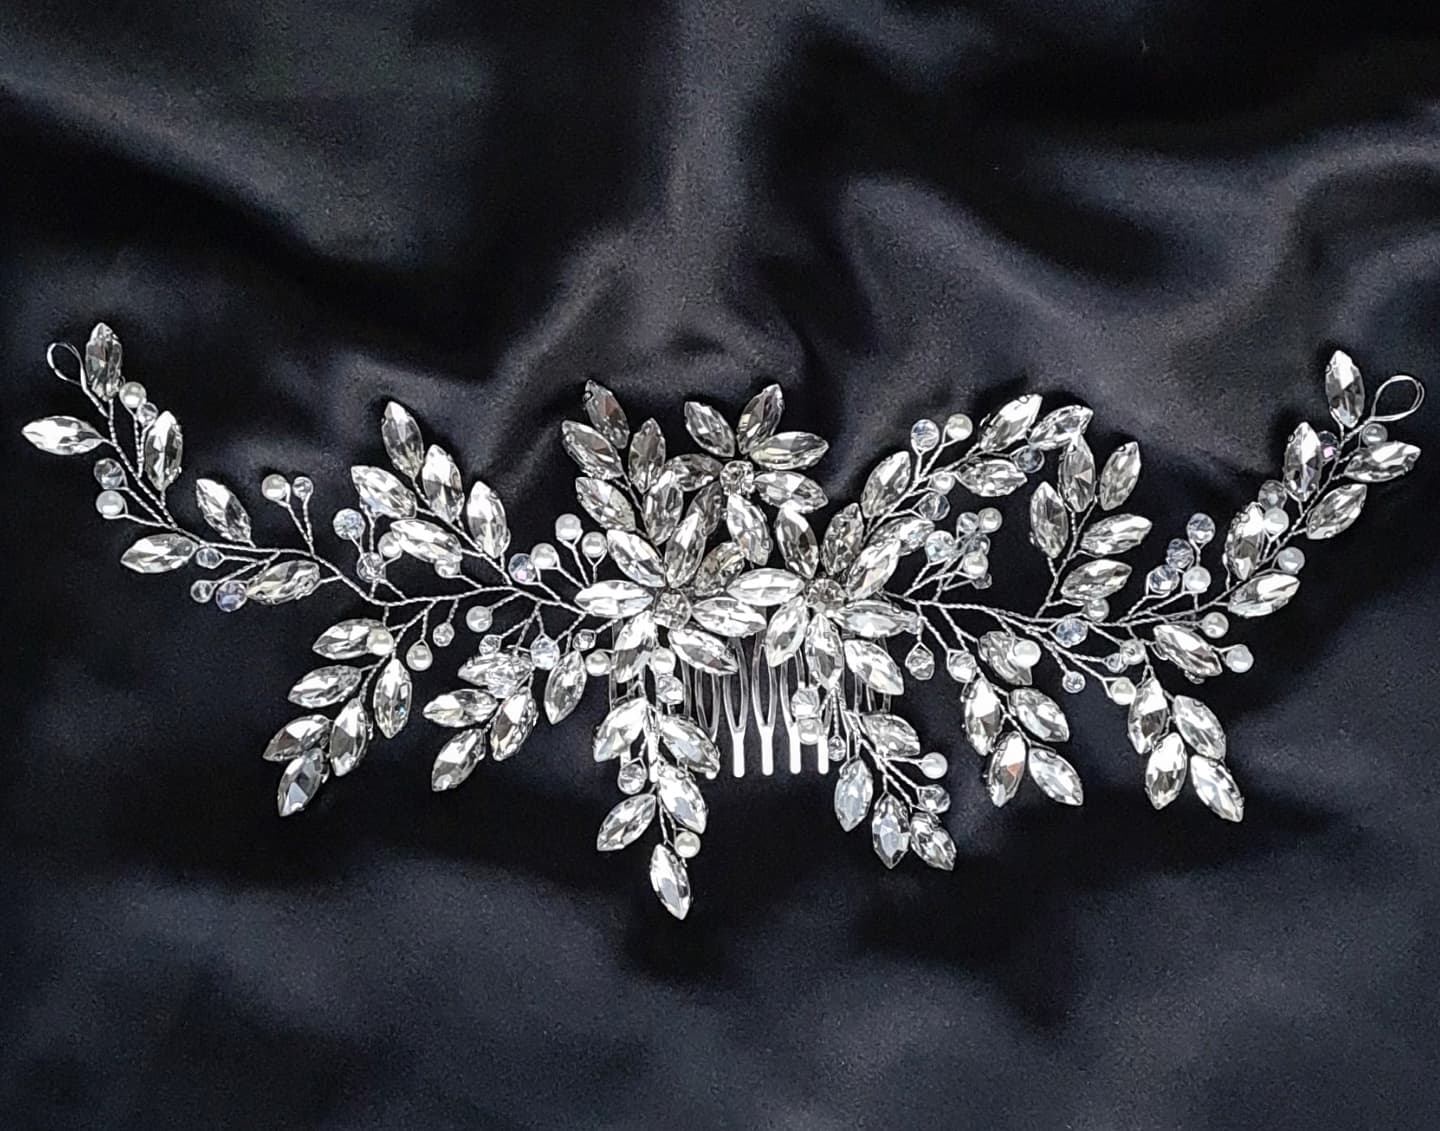 A hair comb with rhinestones and leaves on a black background. It has a delicate design with leaves and flowers. The rhinestones are clear and sparkling. The background is black.